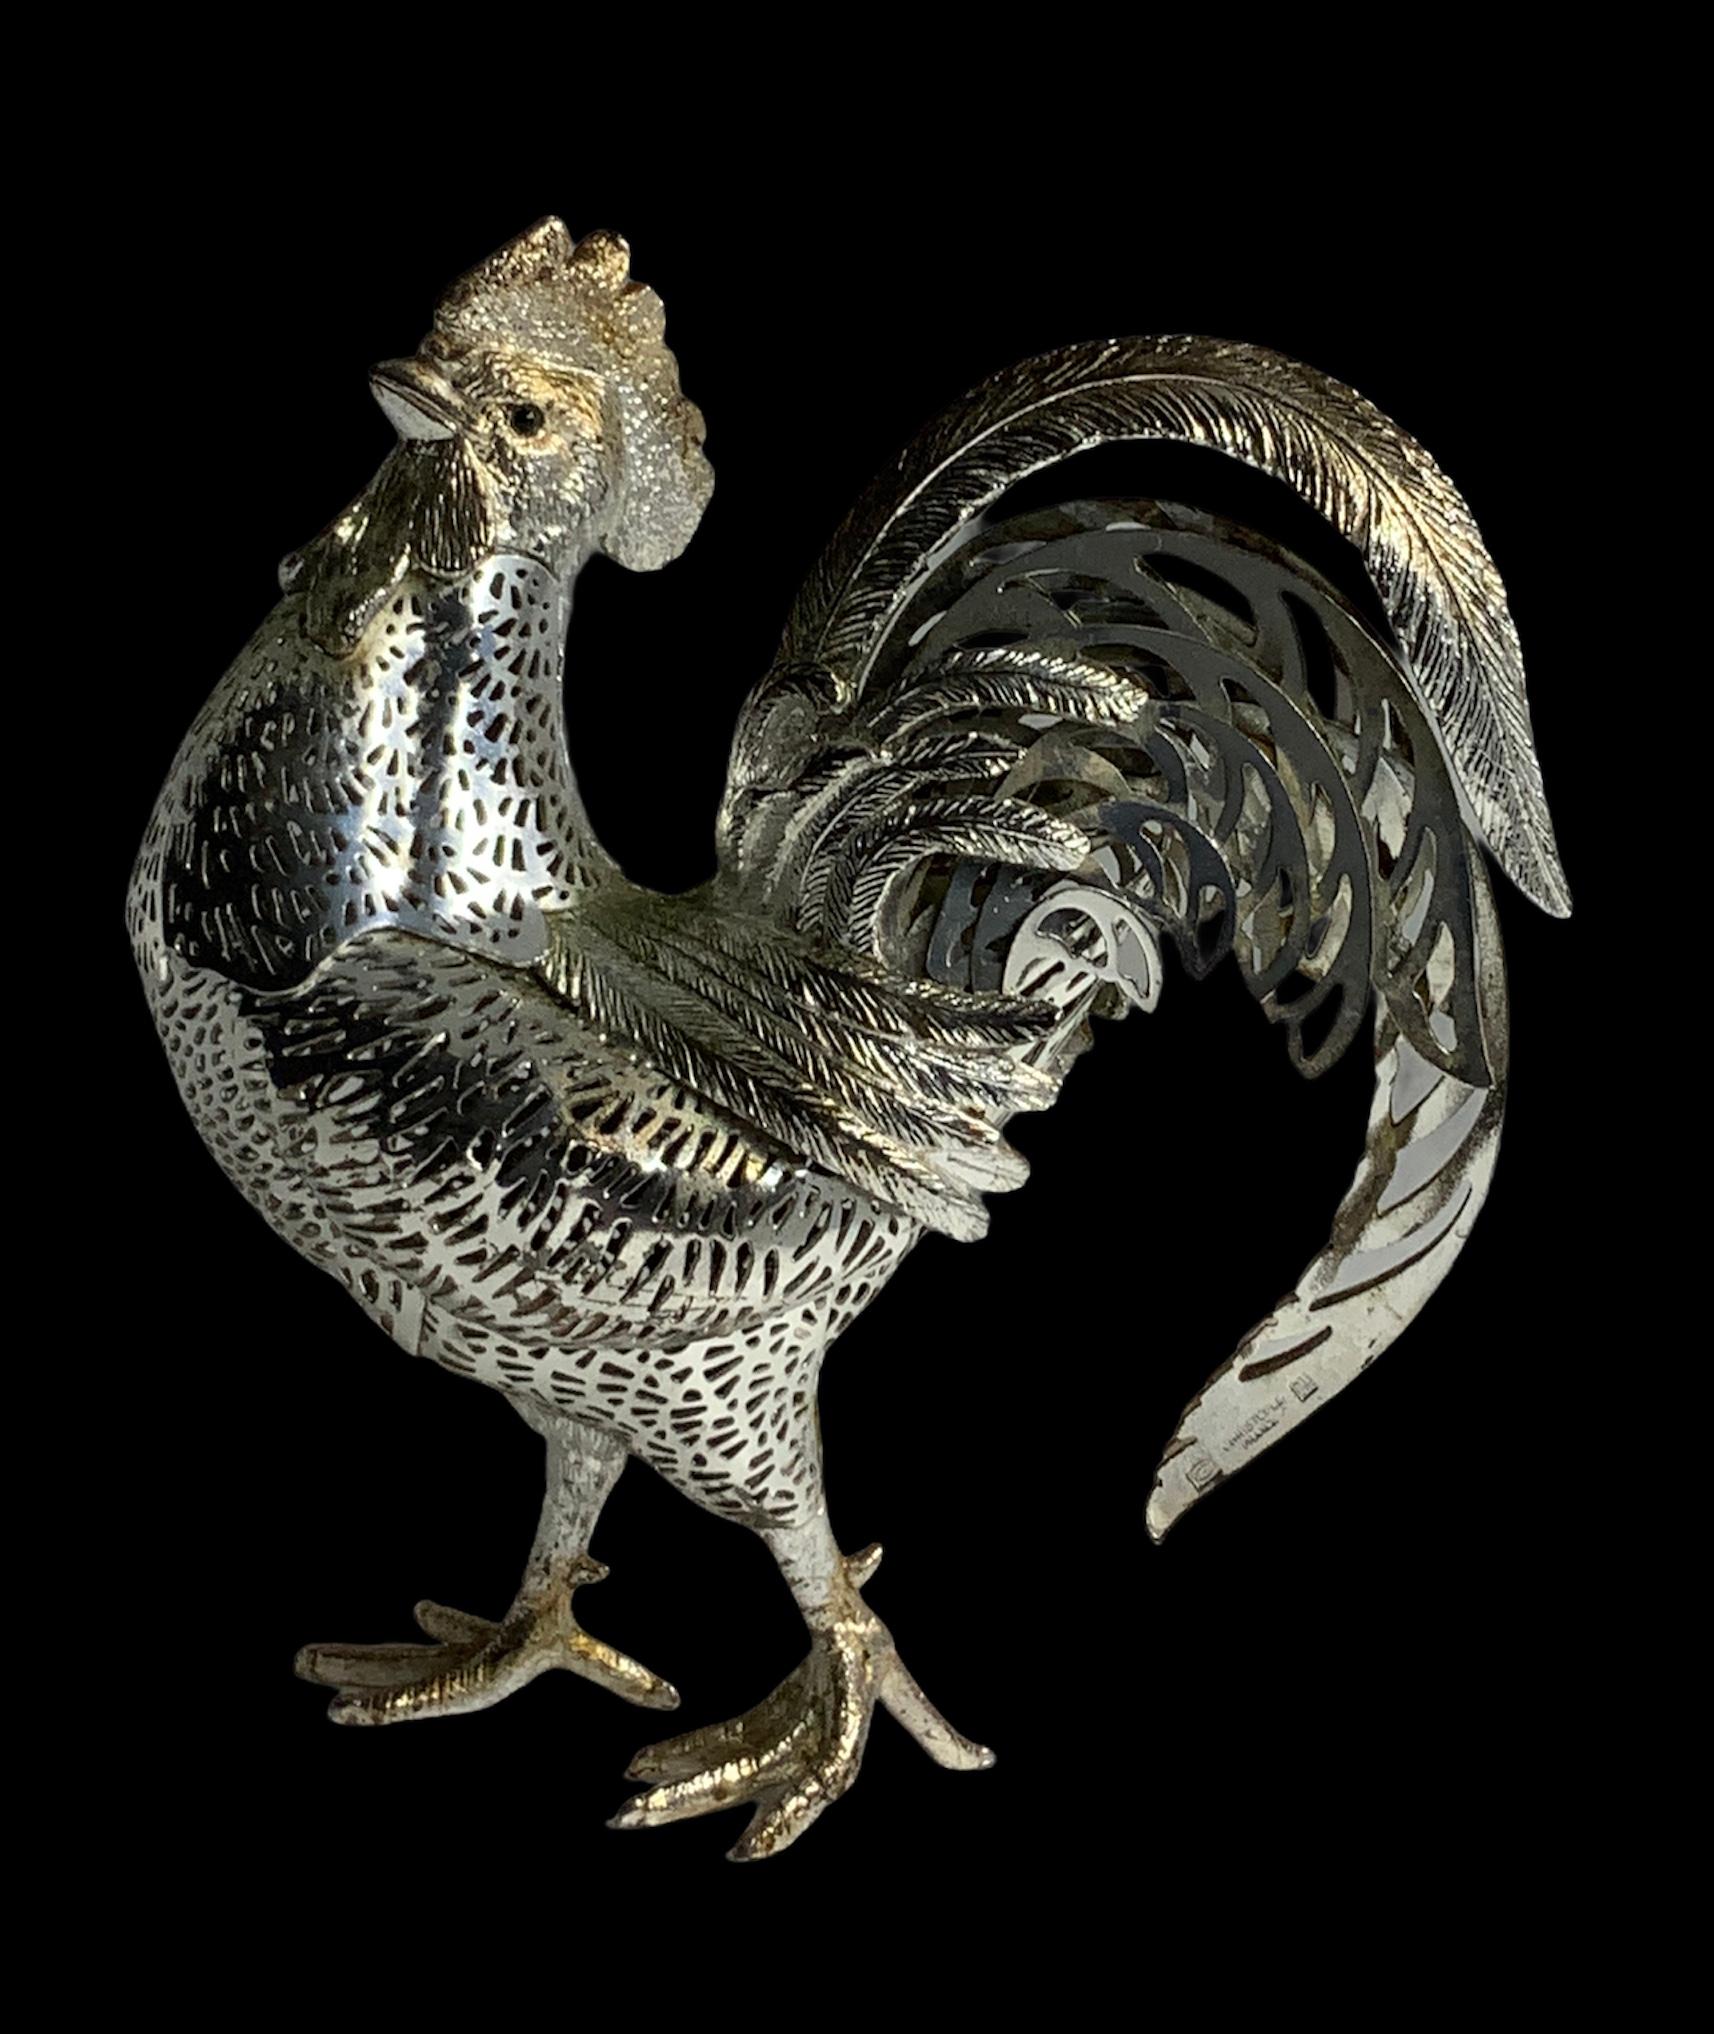 This is a pierced silver plated Christofle Lumiere D’Argent collection small proud rooster sculpture/figurine with enameled black eyes. The rooster has inscribed Christofle, France in one of the sickle feathers.